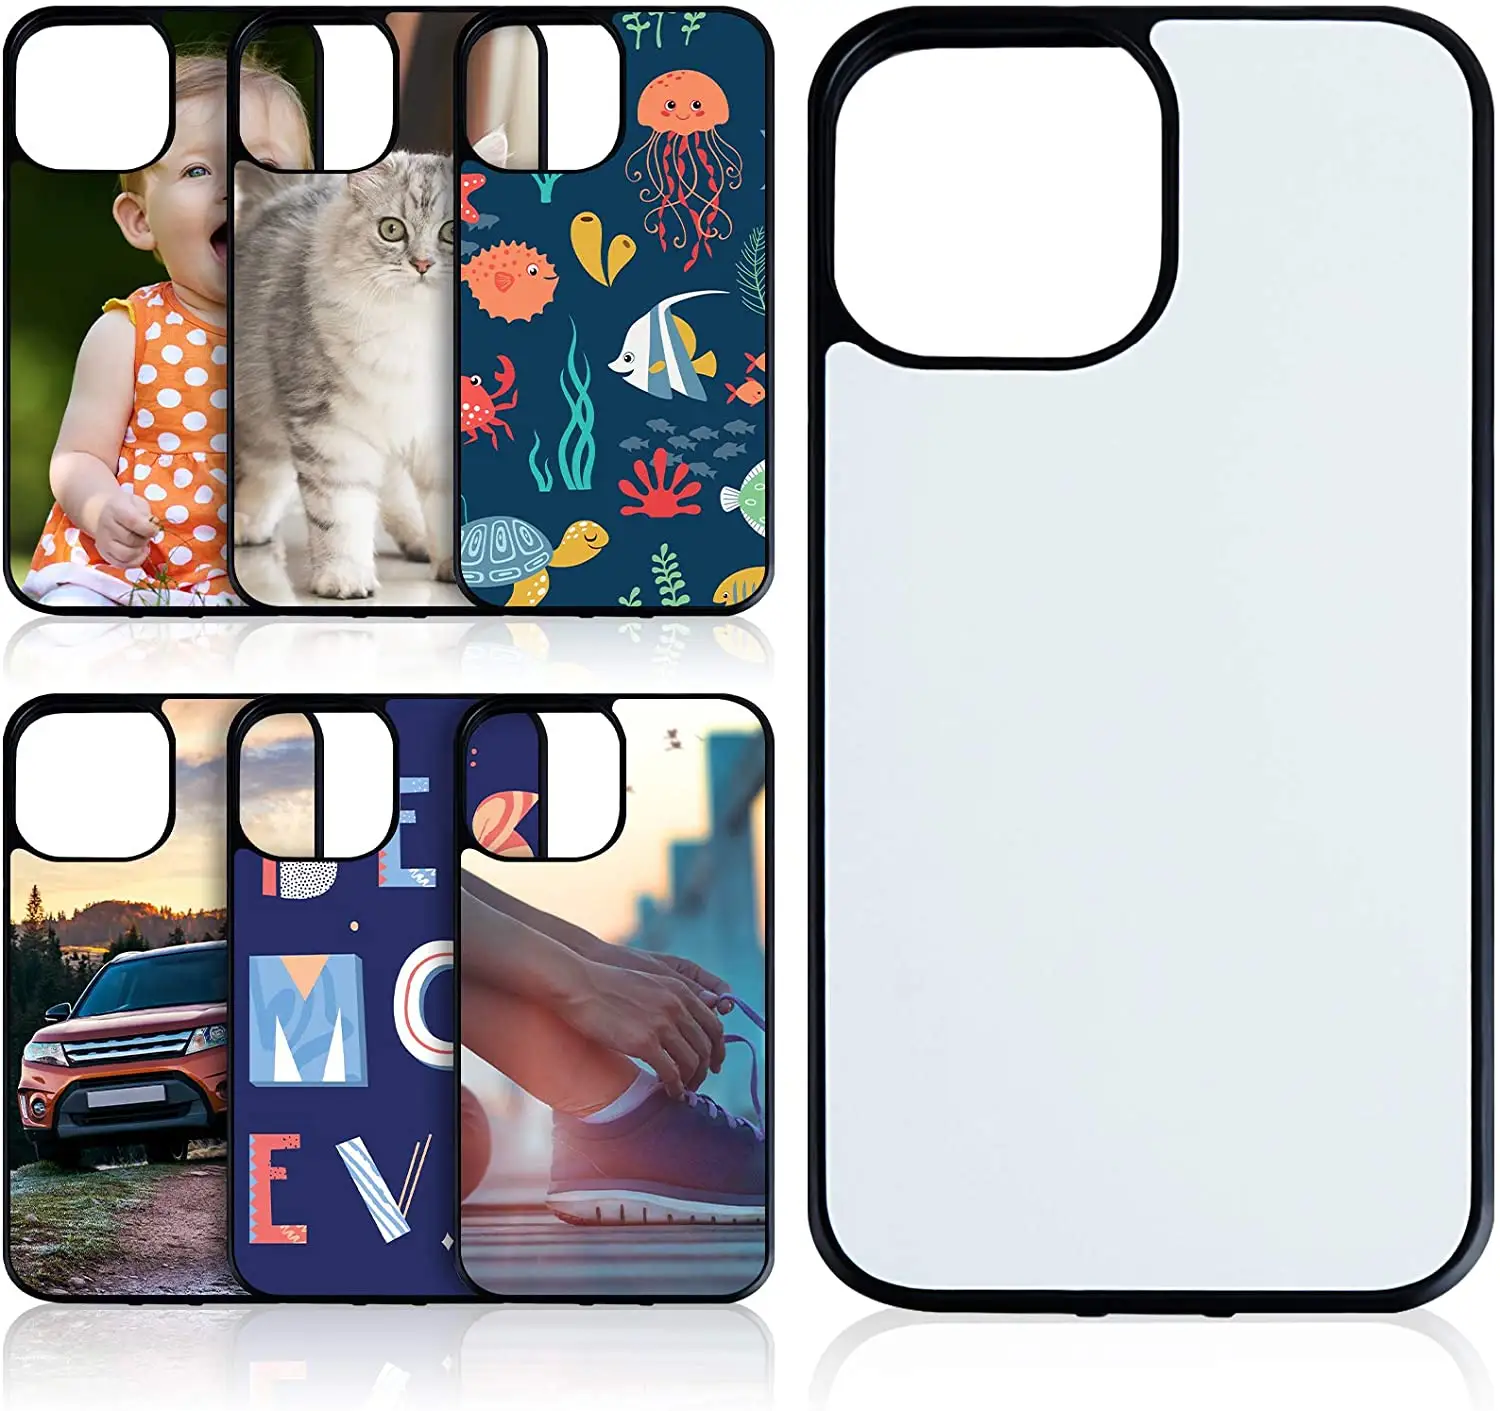 Wholesale 2D 3D Sublimation Phone Cases Blanks for iPhone 11/12/13 Pro Max